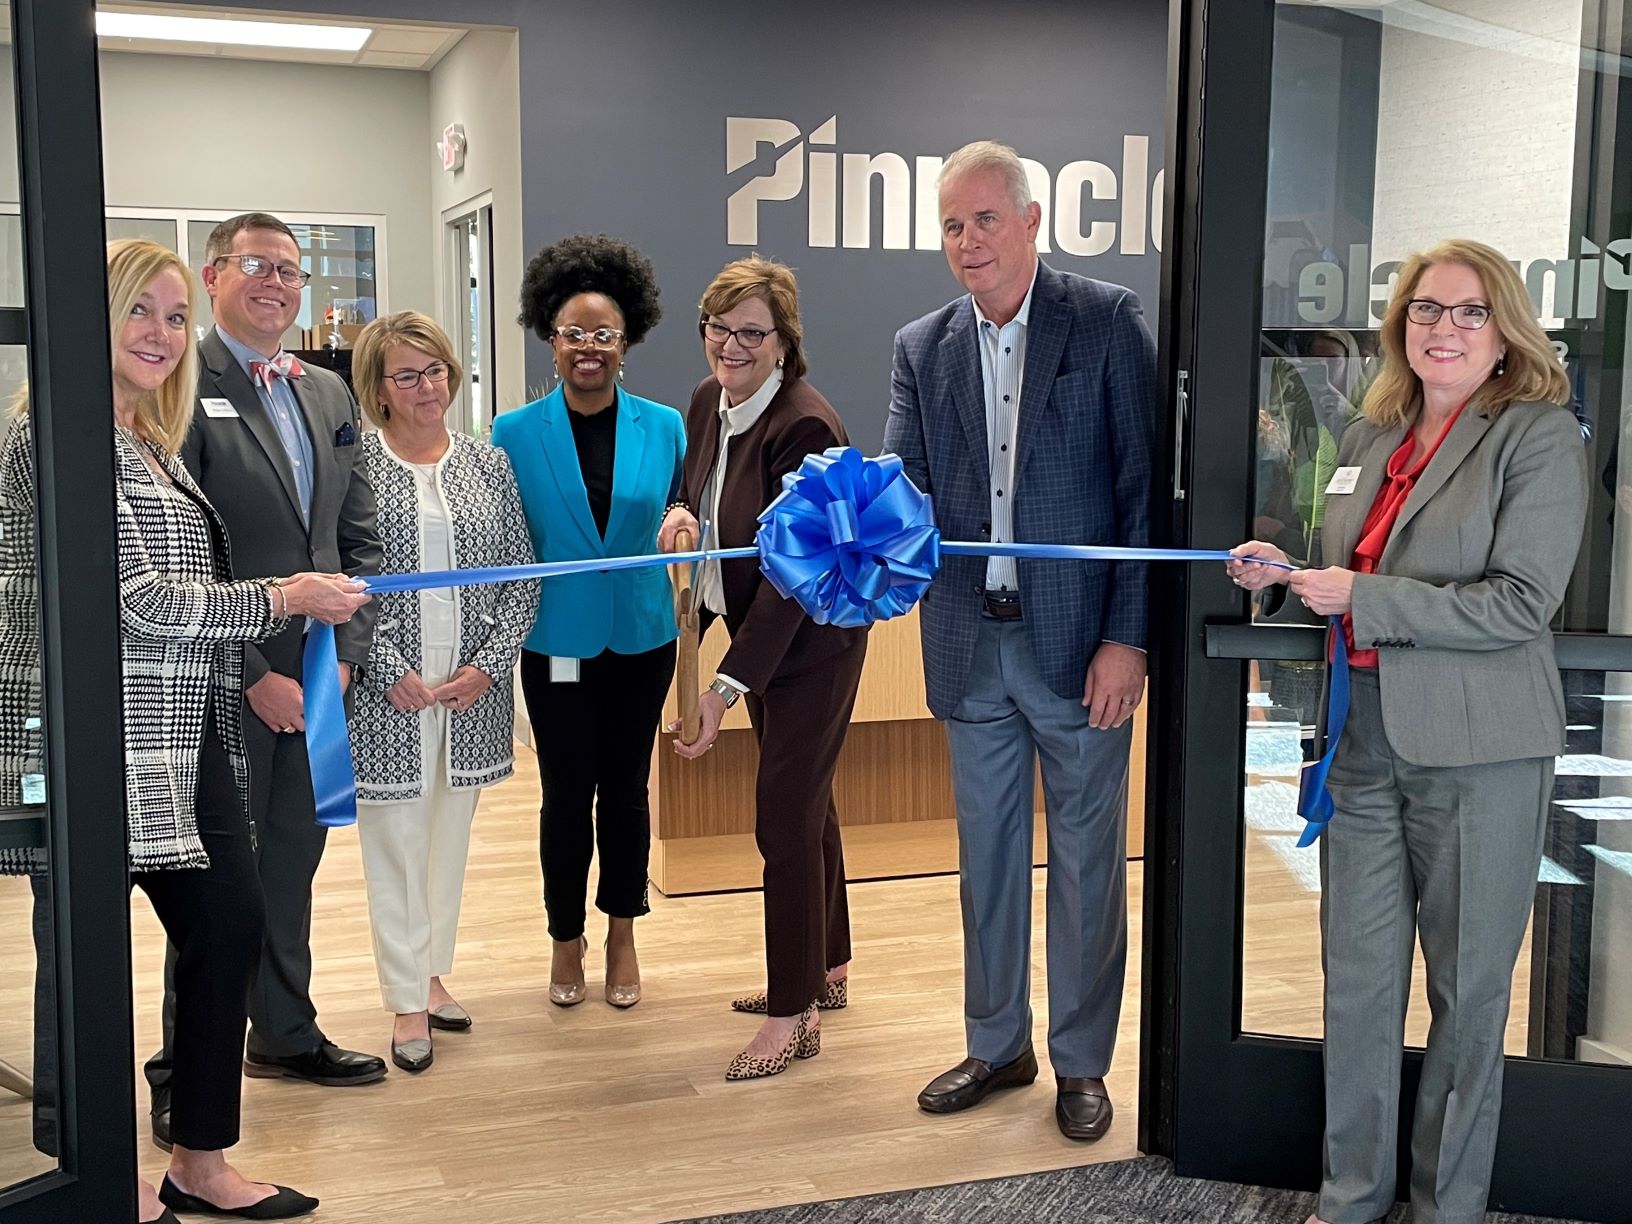 Opening new locations like this Nexton Parkway office in Summerville is tangible evidence of Pinnacle's commitment to the market.